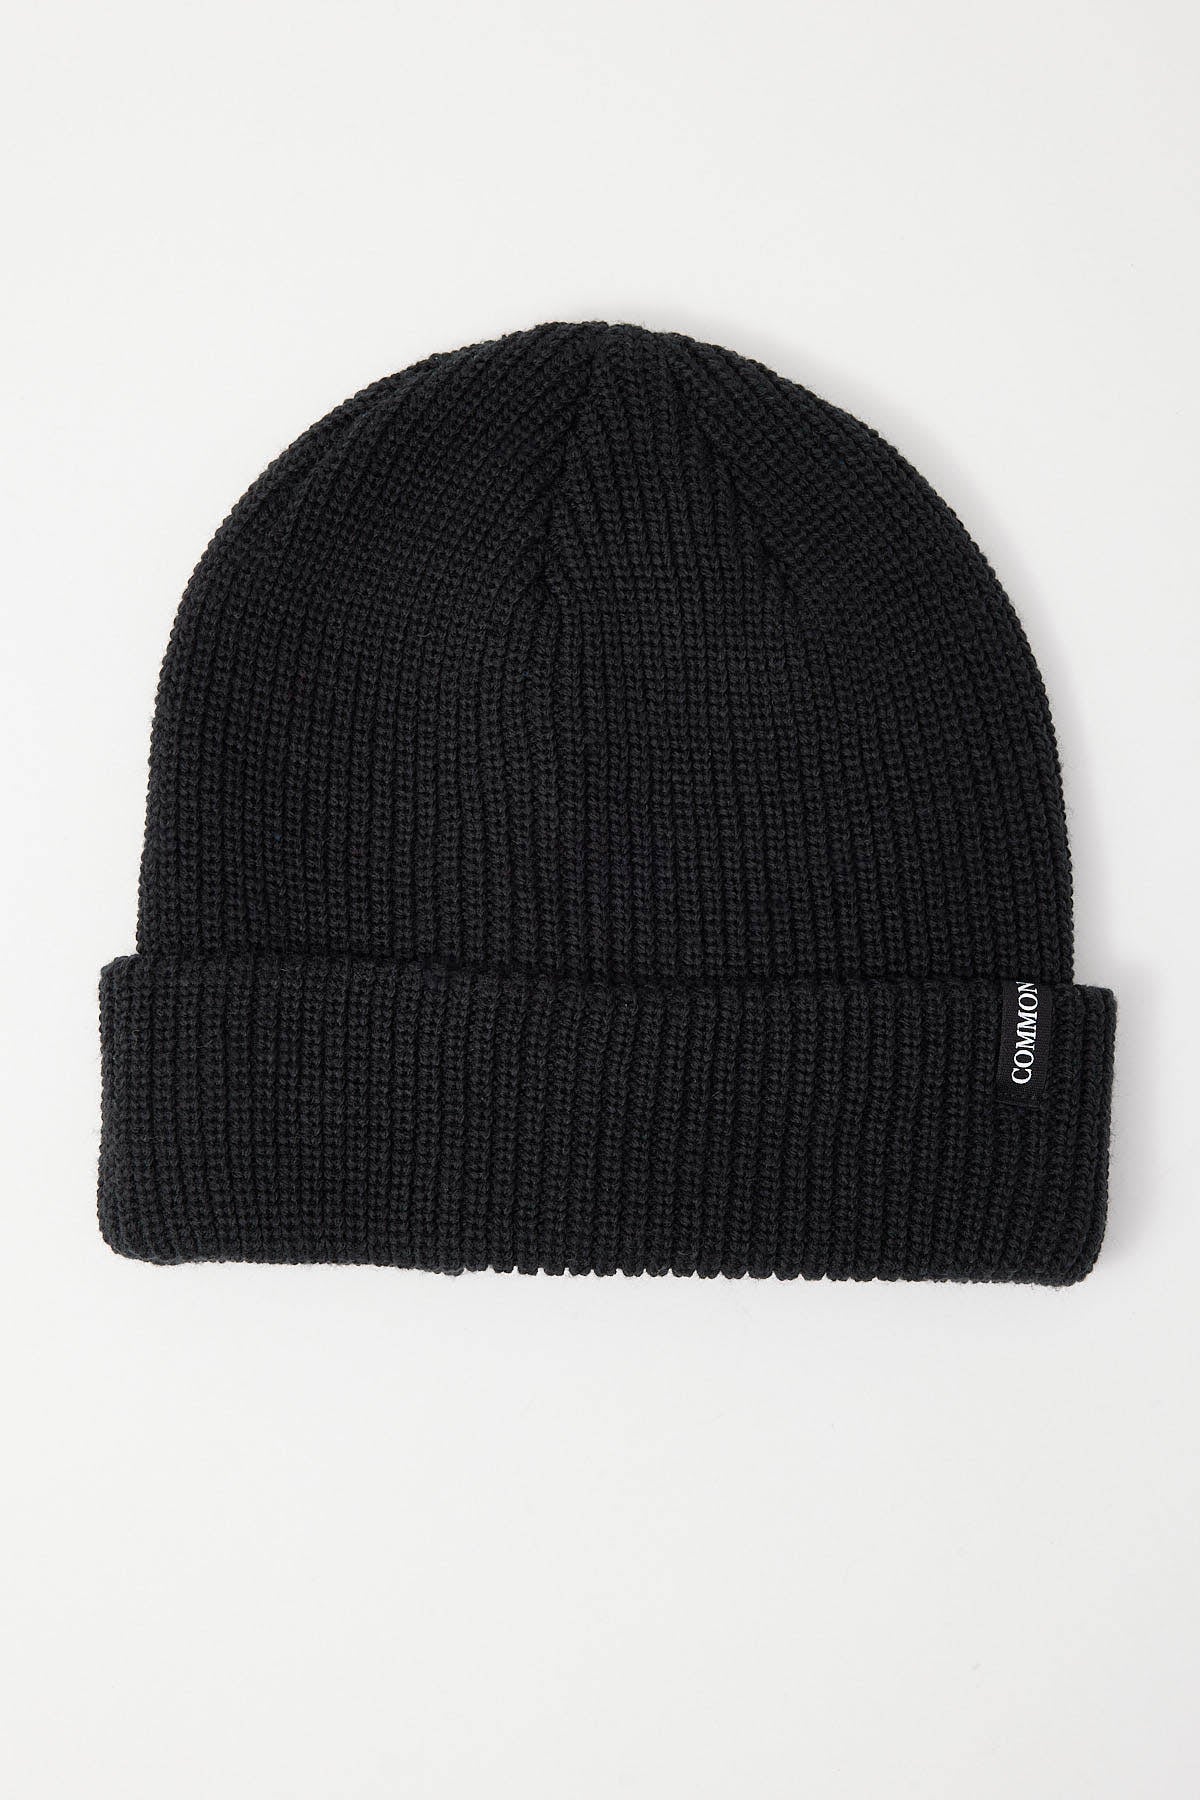 Common Need Better Low Profile Beanie Black